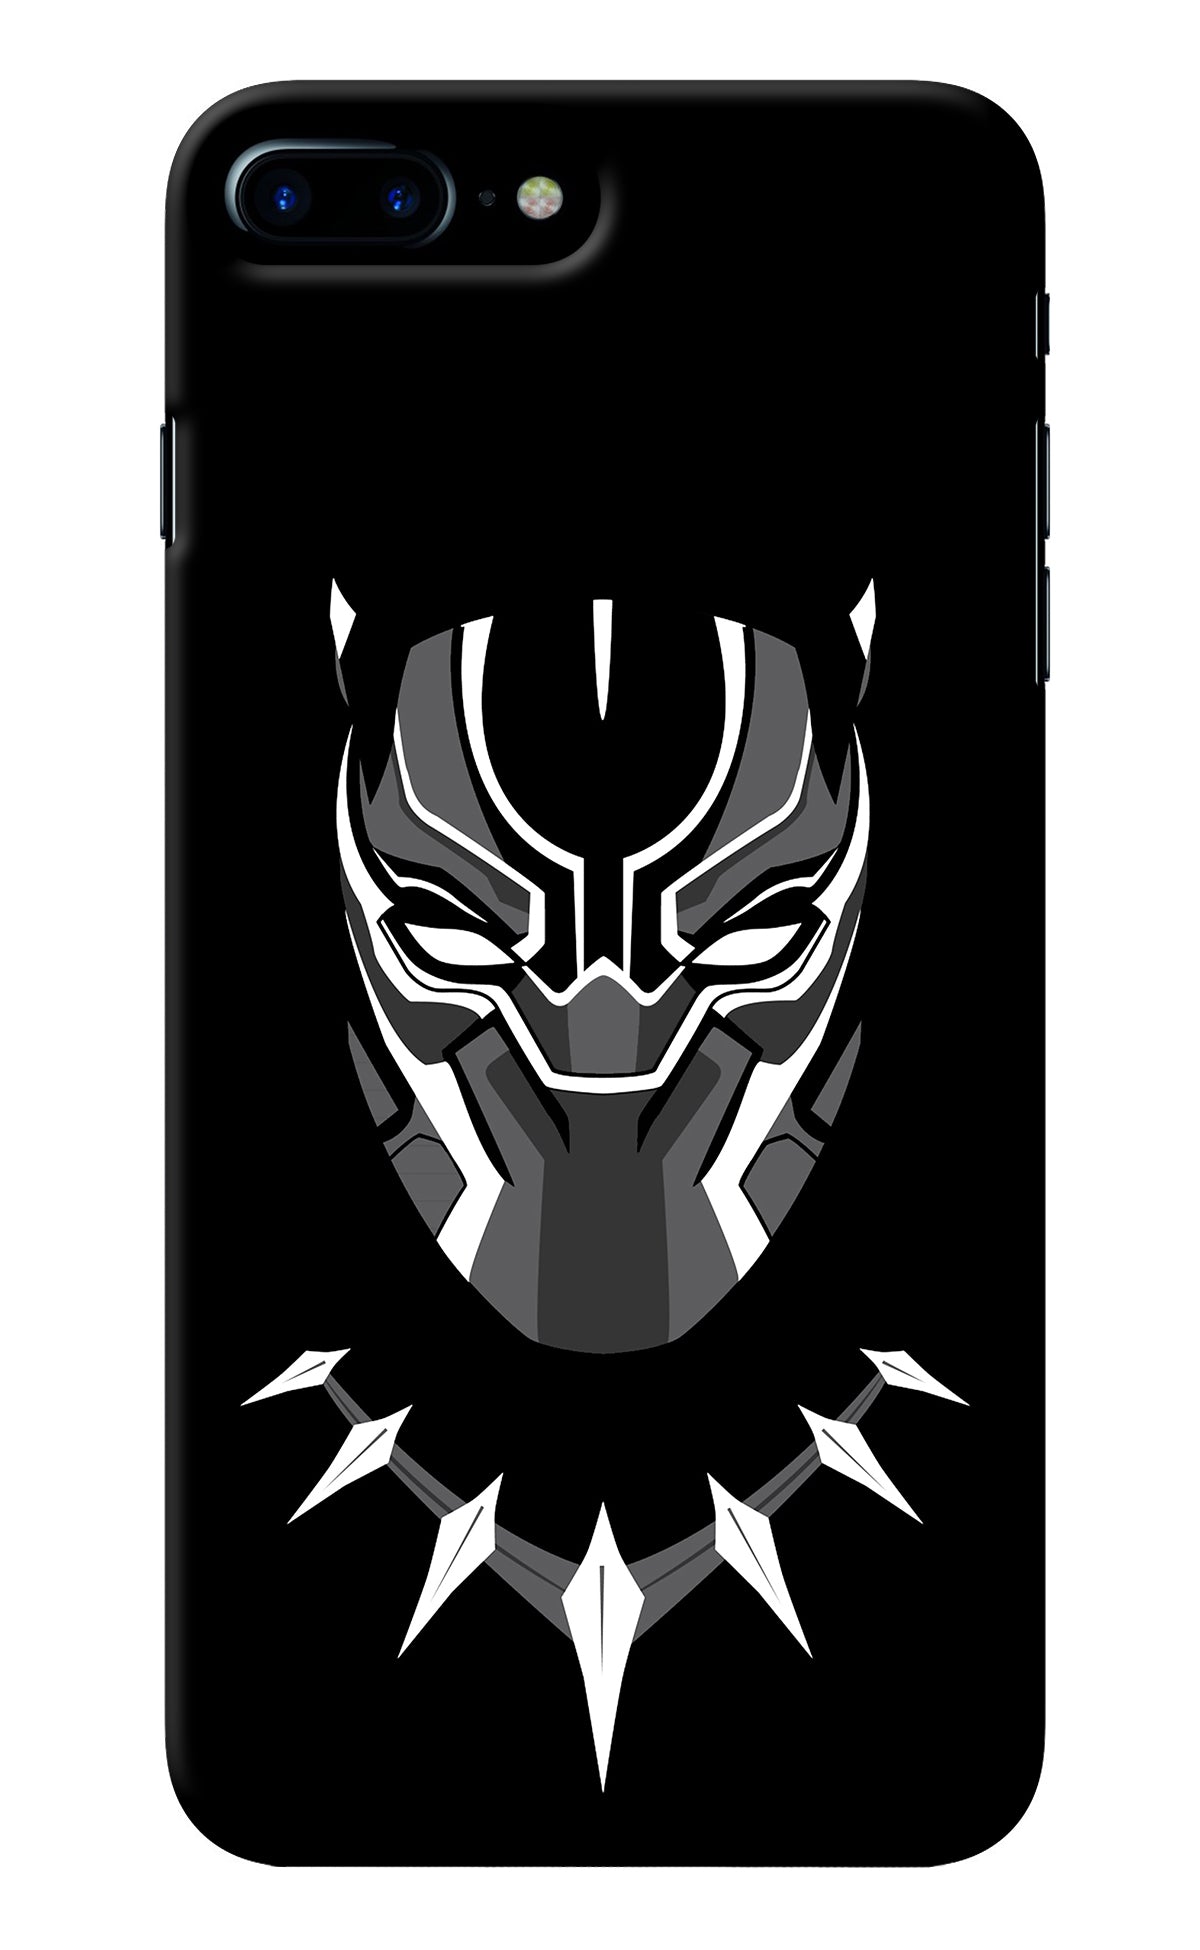 Black Panther iPhone 7 Plus Back Cover